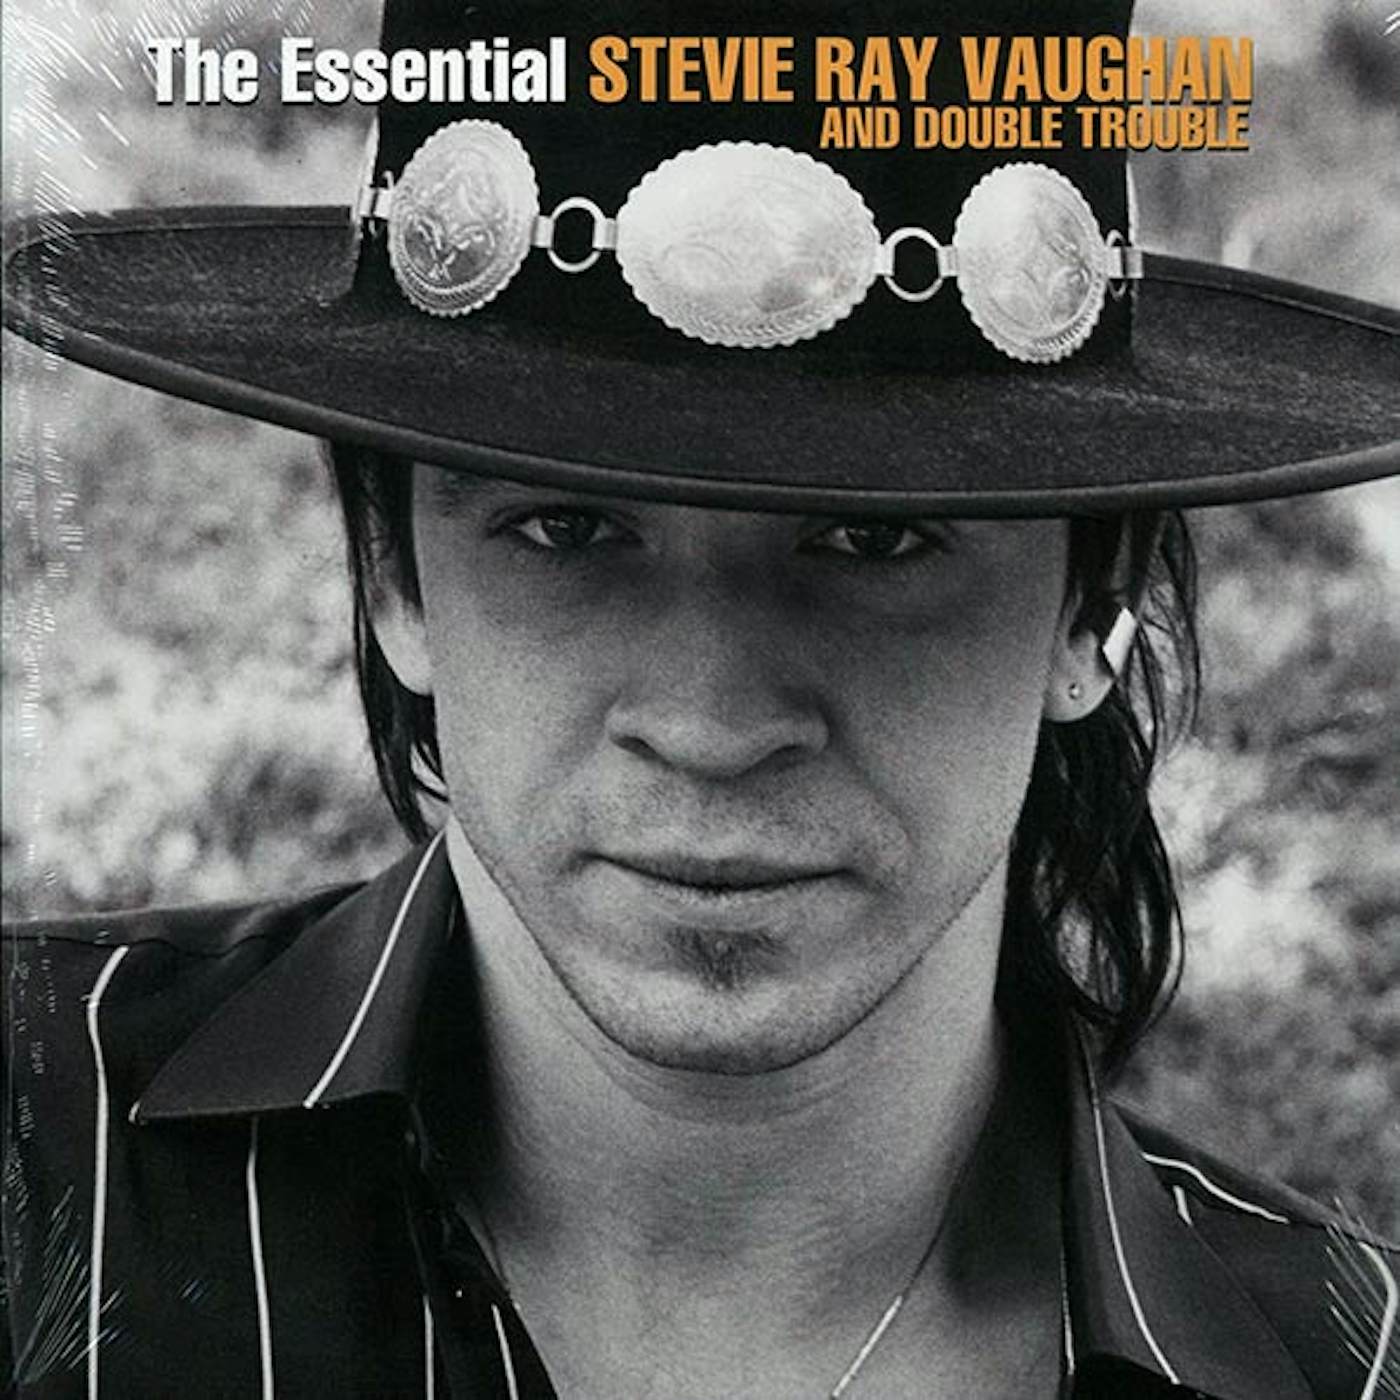 Stevie Ray Vaughan, Double Trouble  LP -  The Essential Stevie Ray Vaughan And Double Trouble (2xLP) (Vinyl)